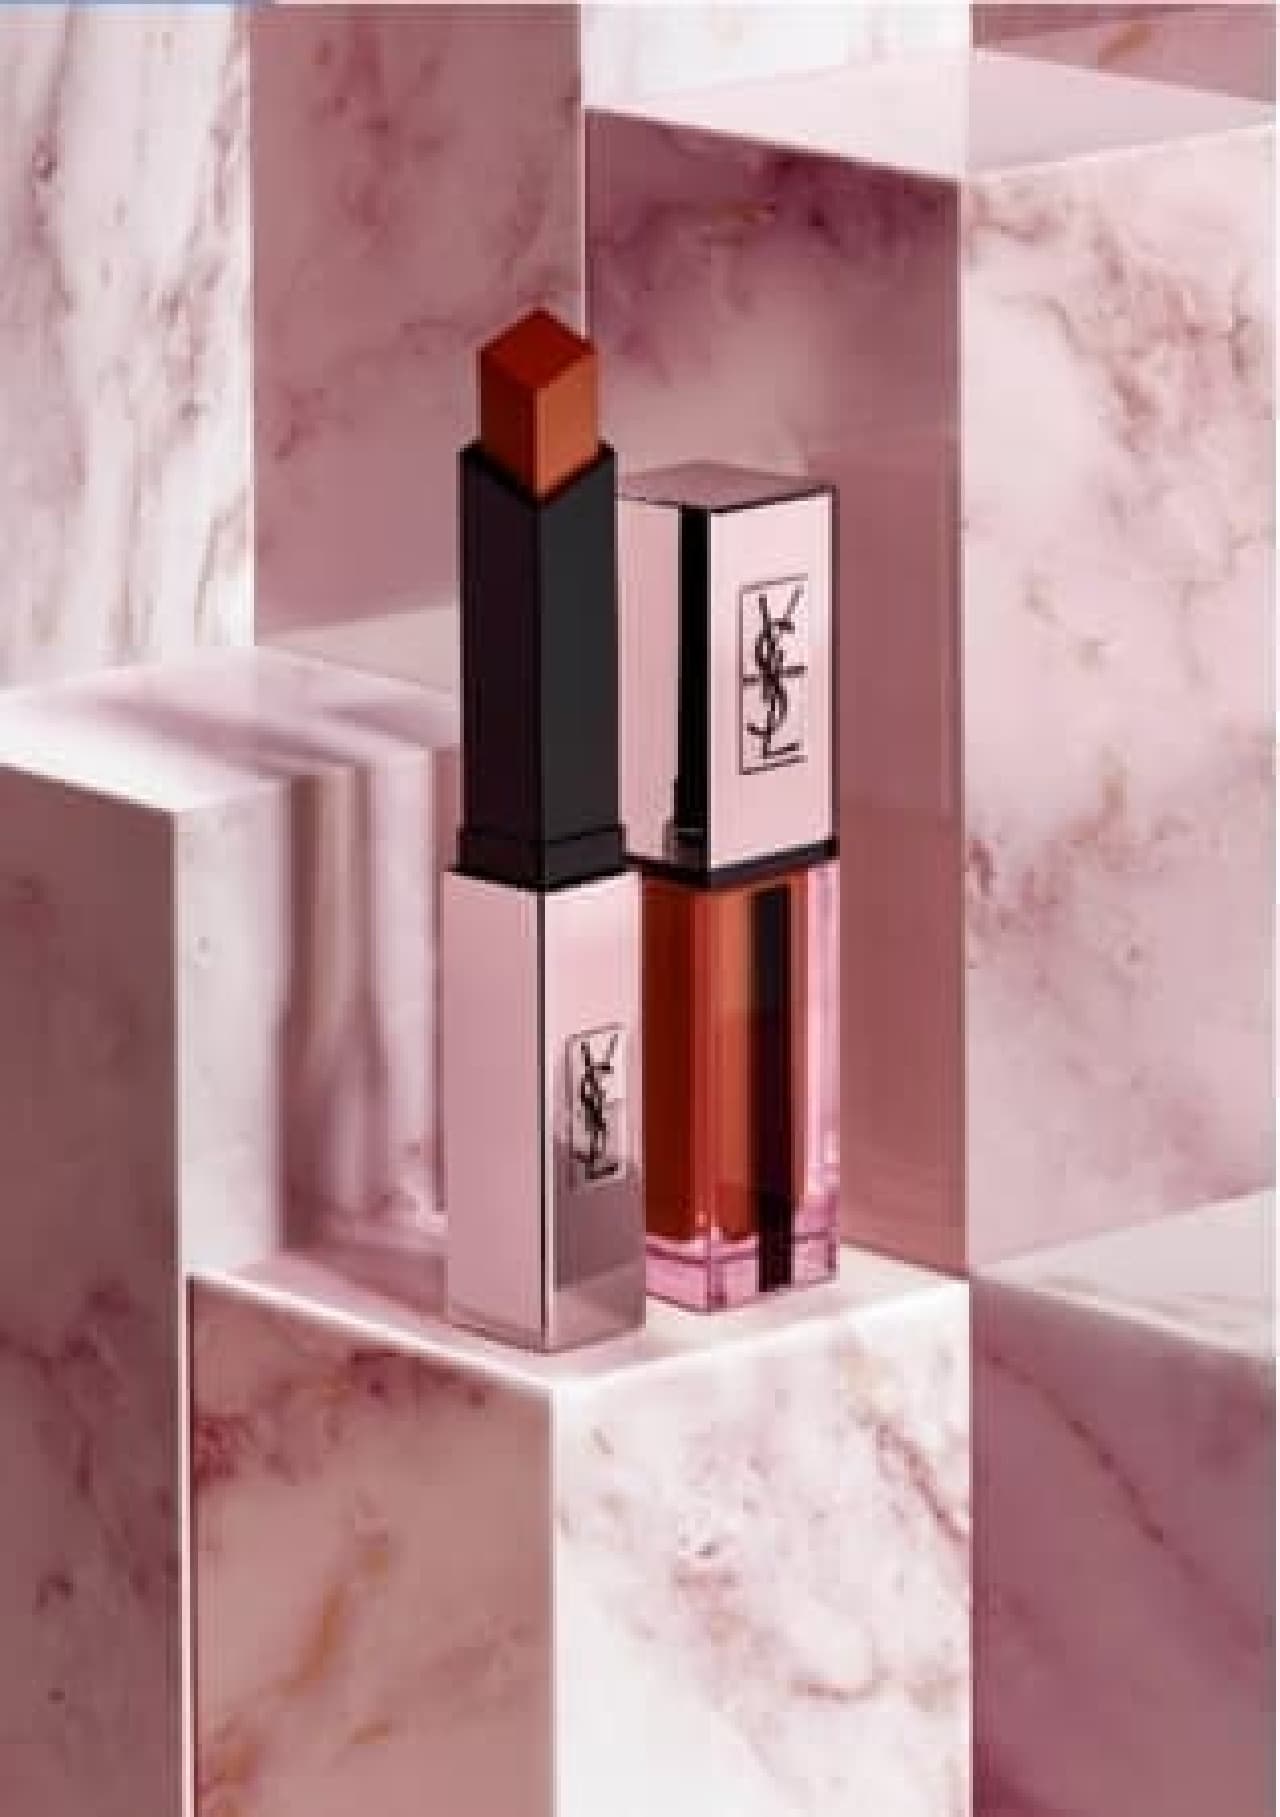 YSL's new lip collection "Irisit Nude"